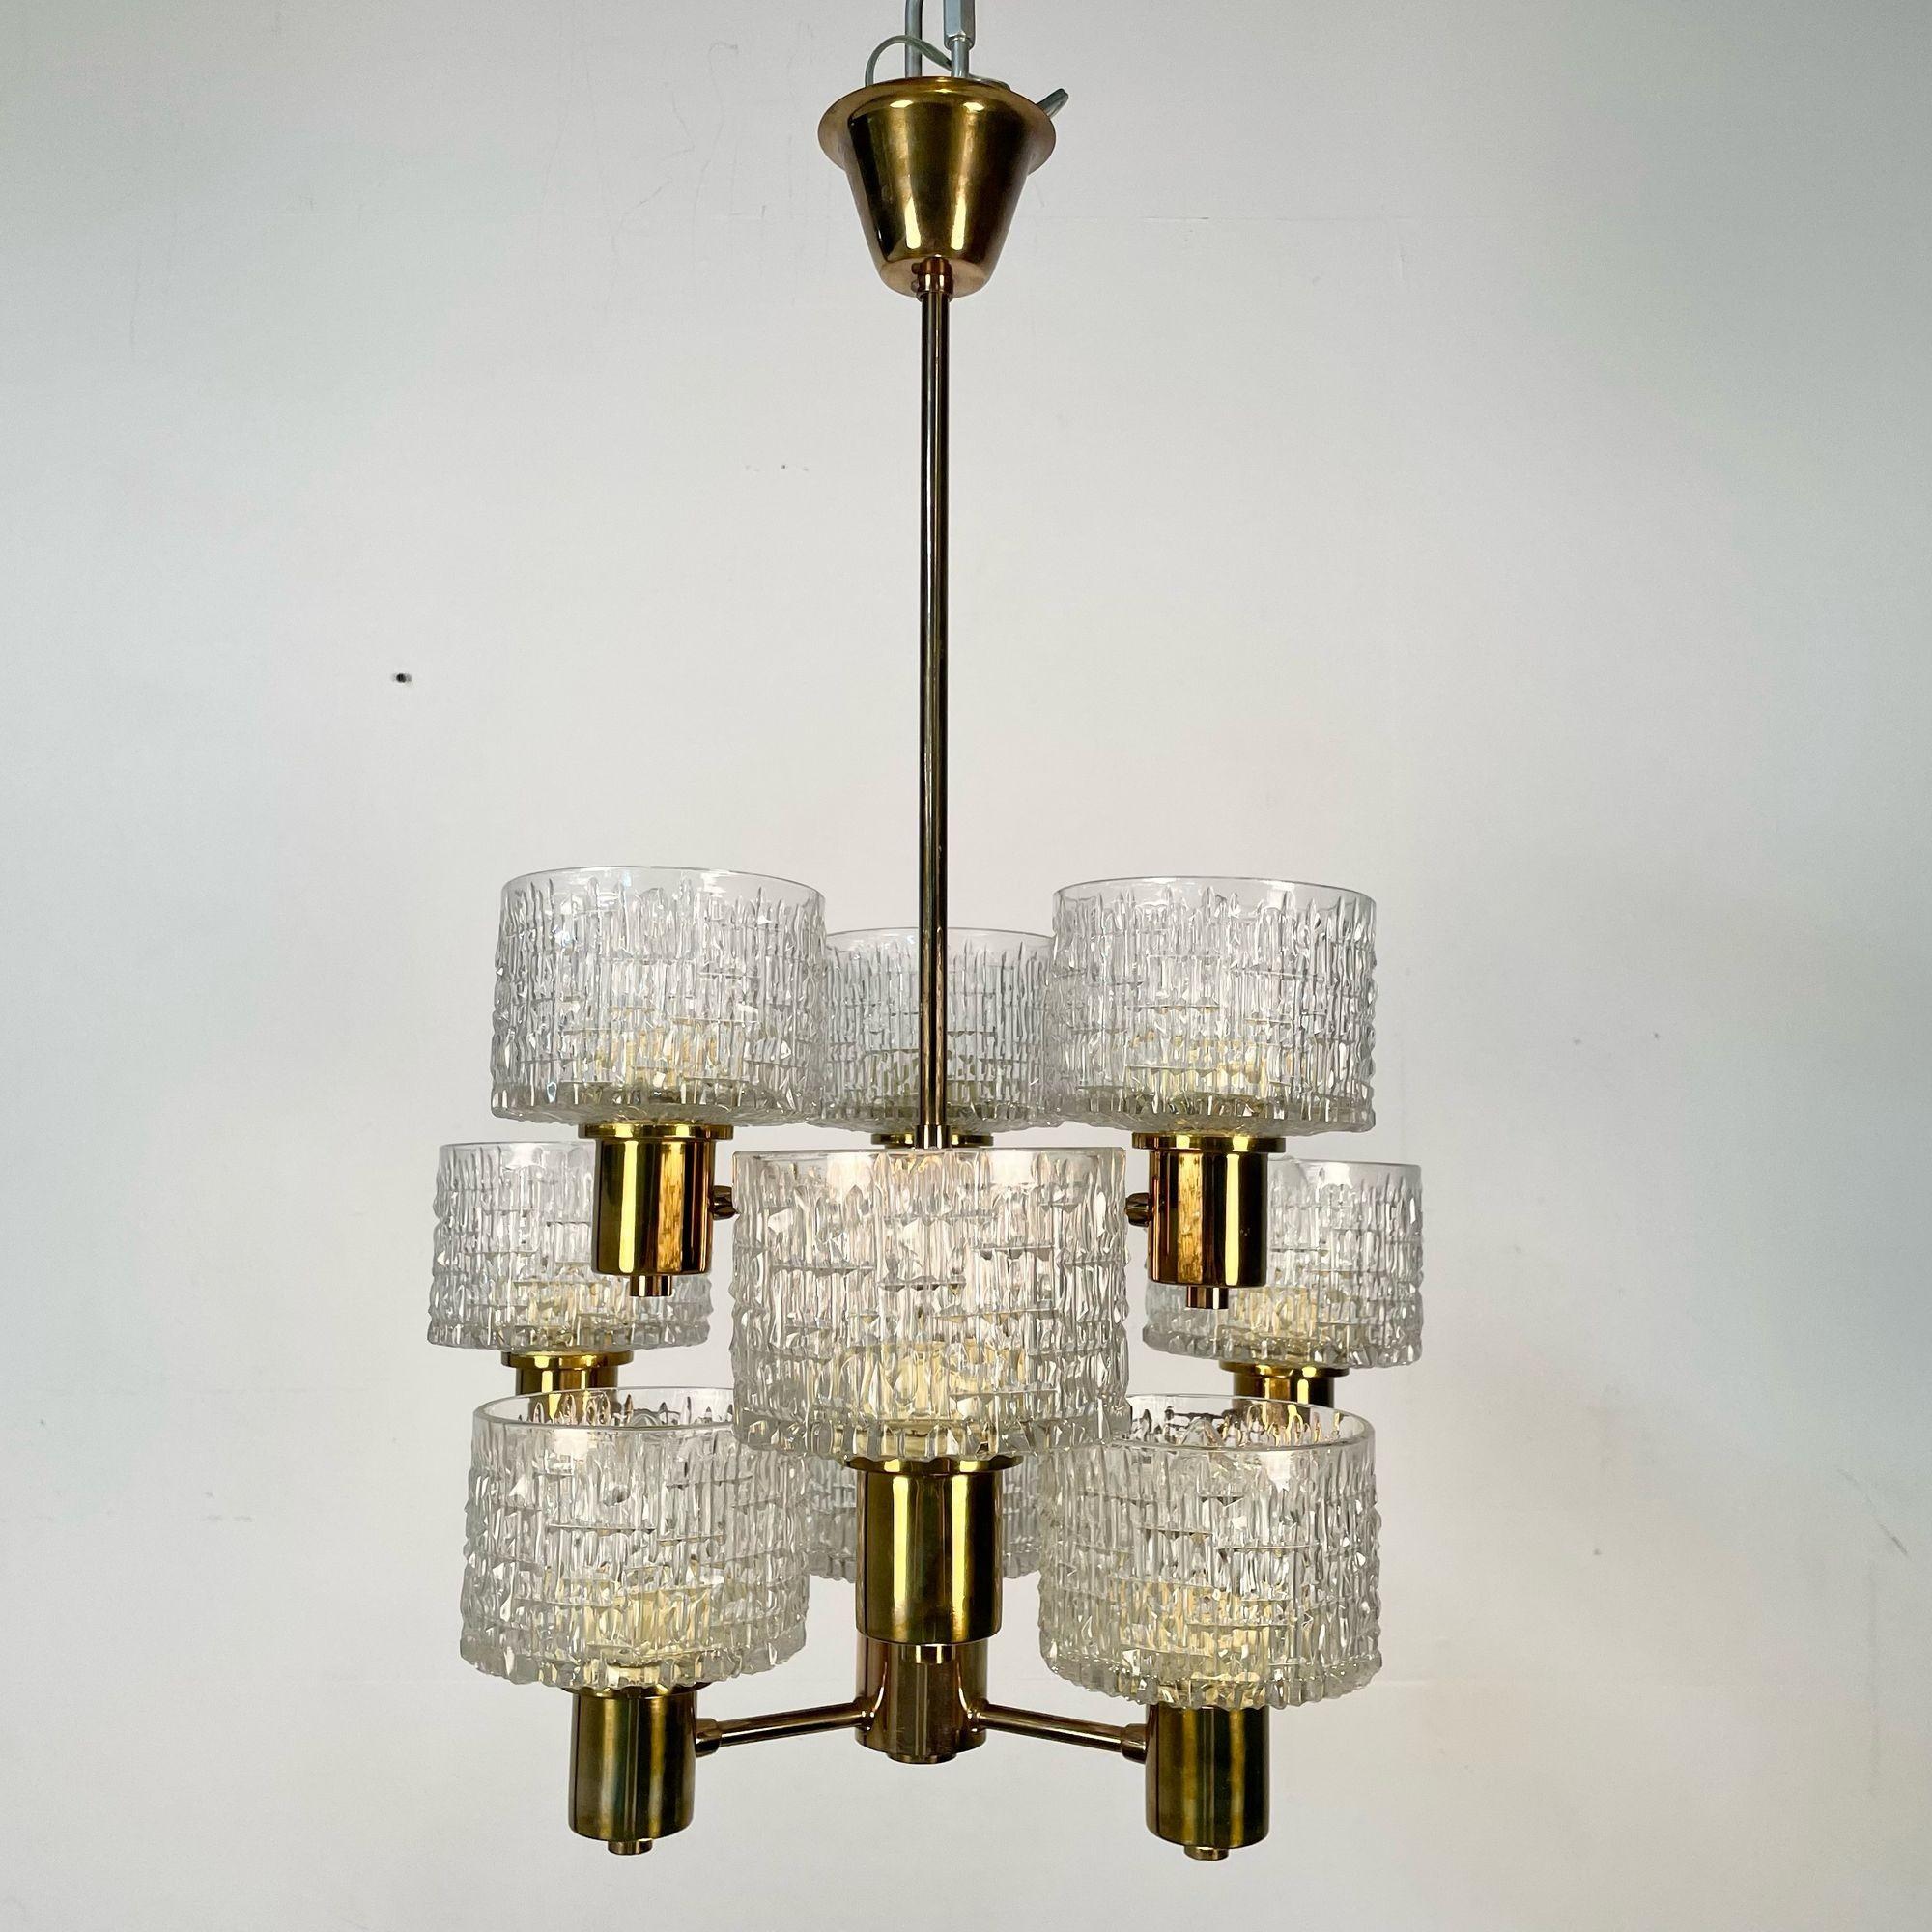 Swedish Mid-Century Modern 9 Light Chandelier / Pendant by Hans-Agne Jakobsson
 
Rare chandelier or pendant designed by Hans-Agne Jakobsson in Sweden circa 1960s. Having it's original brass frame with 9 lights and 9 original period correct textured